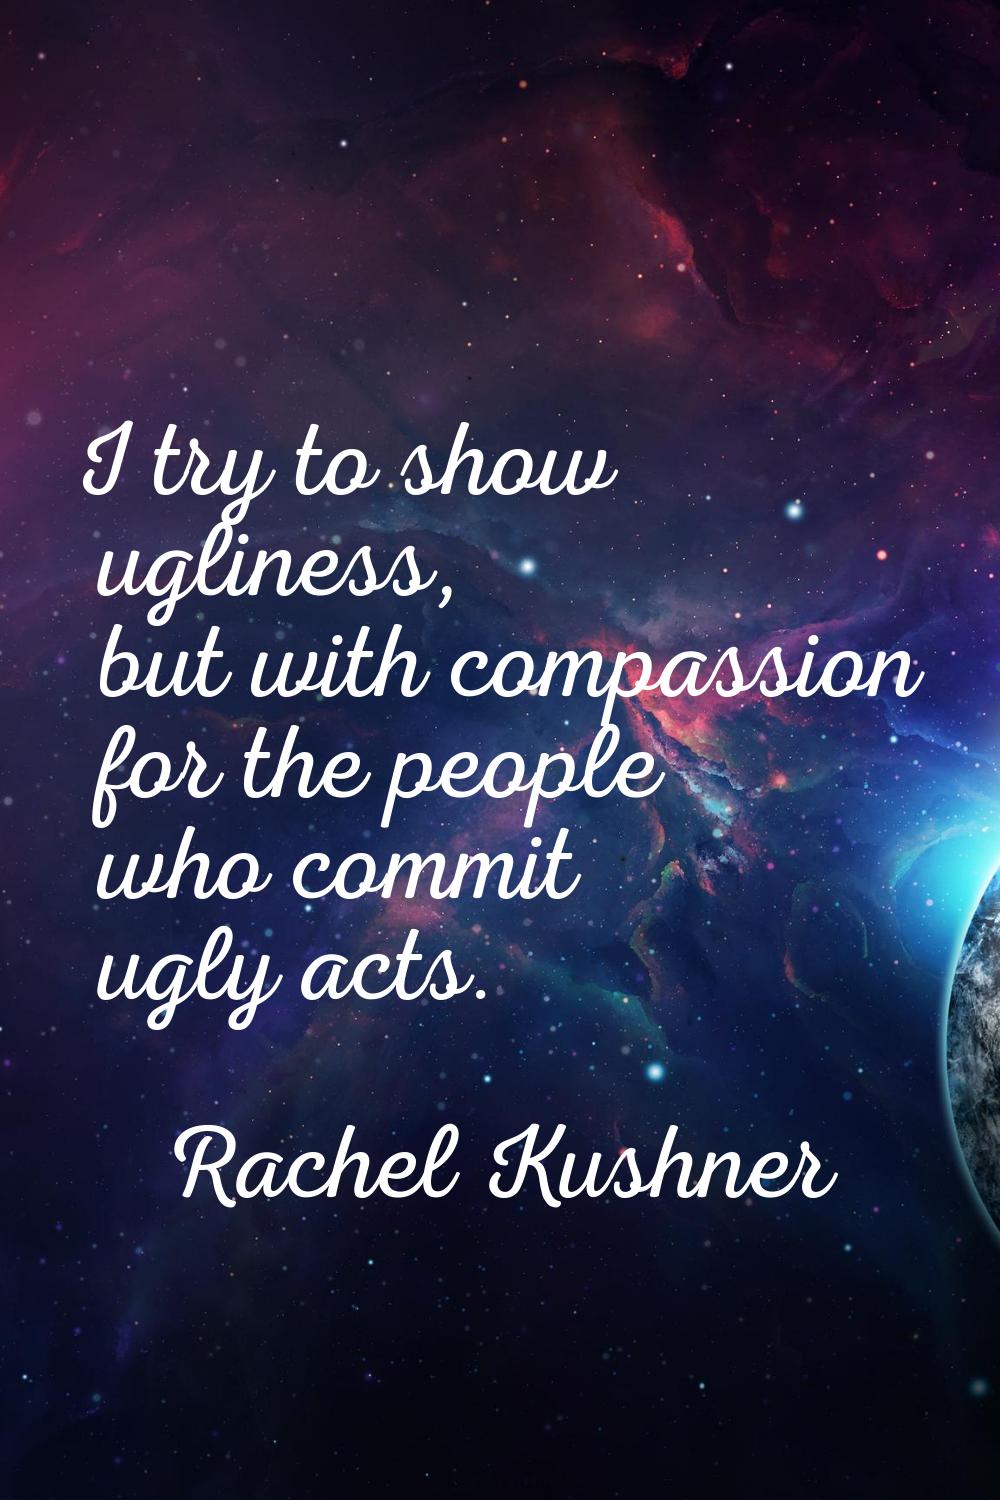 I try to show ugliness, but with compassion for the people who commit ugly acts.